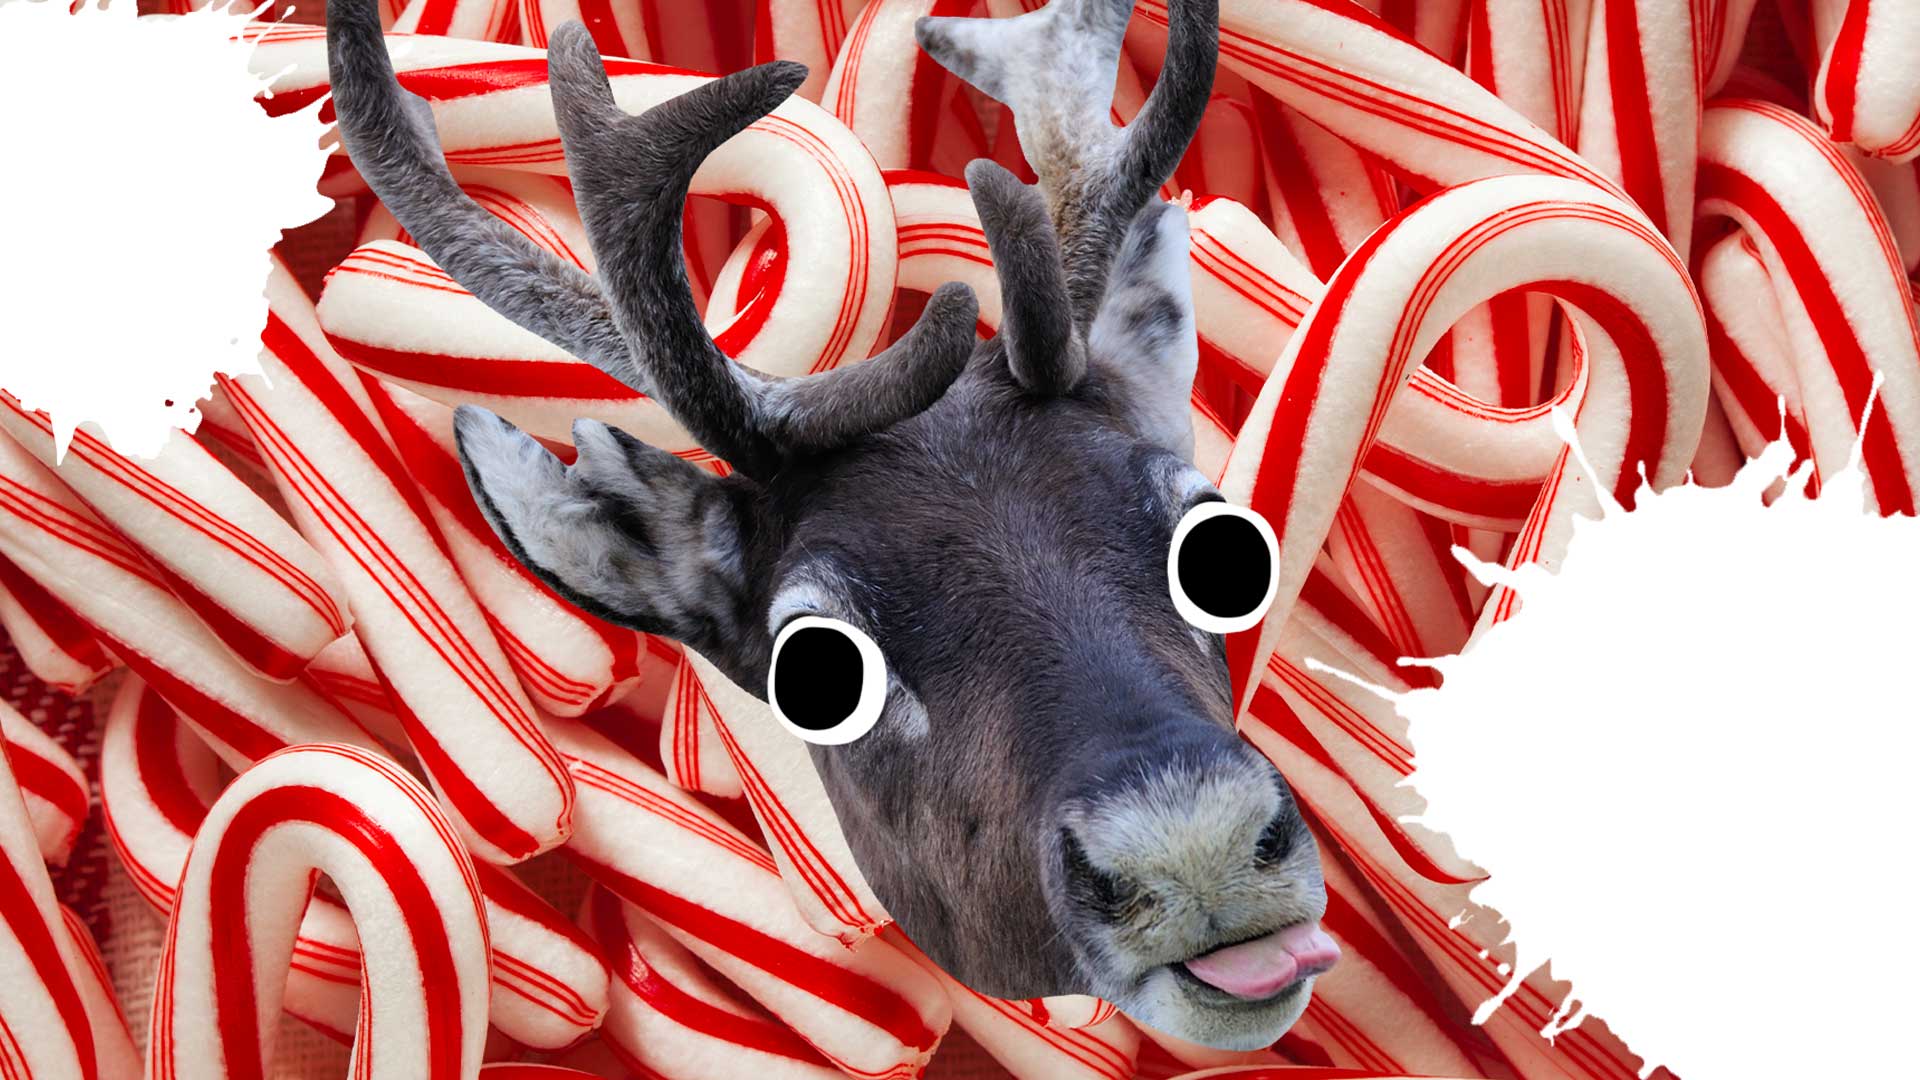 Reindeer and candy canes